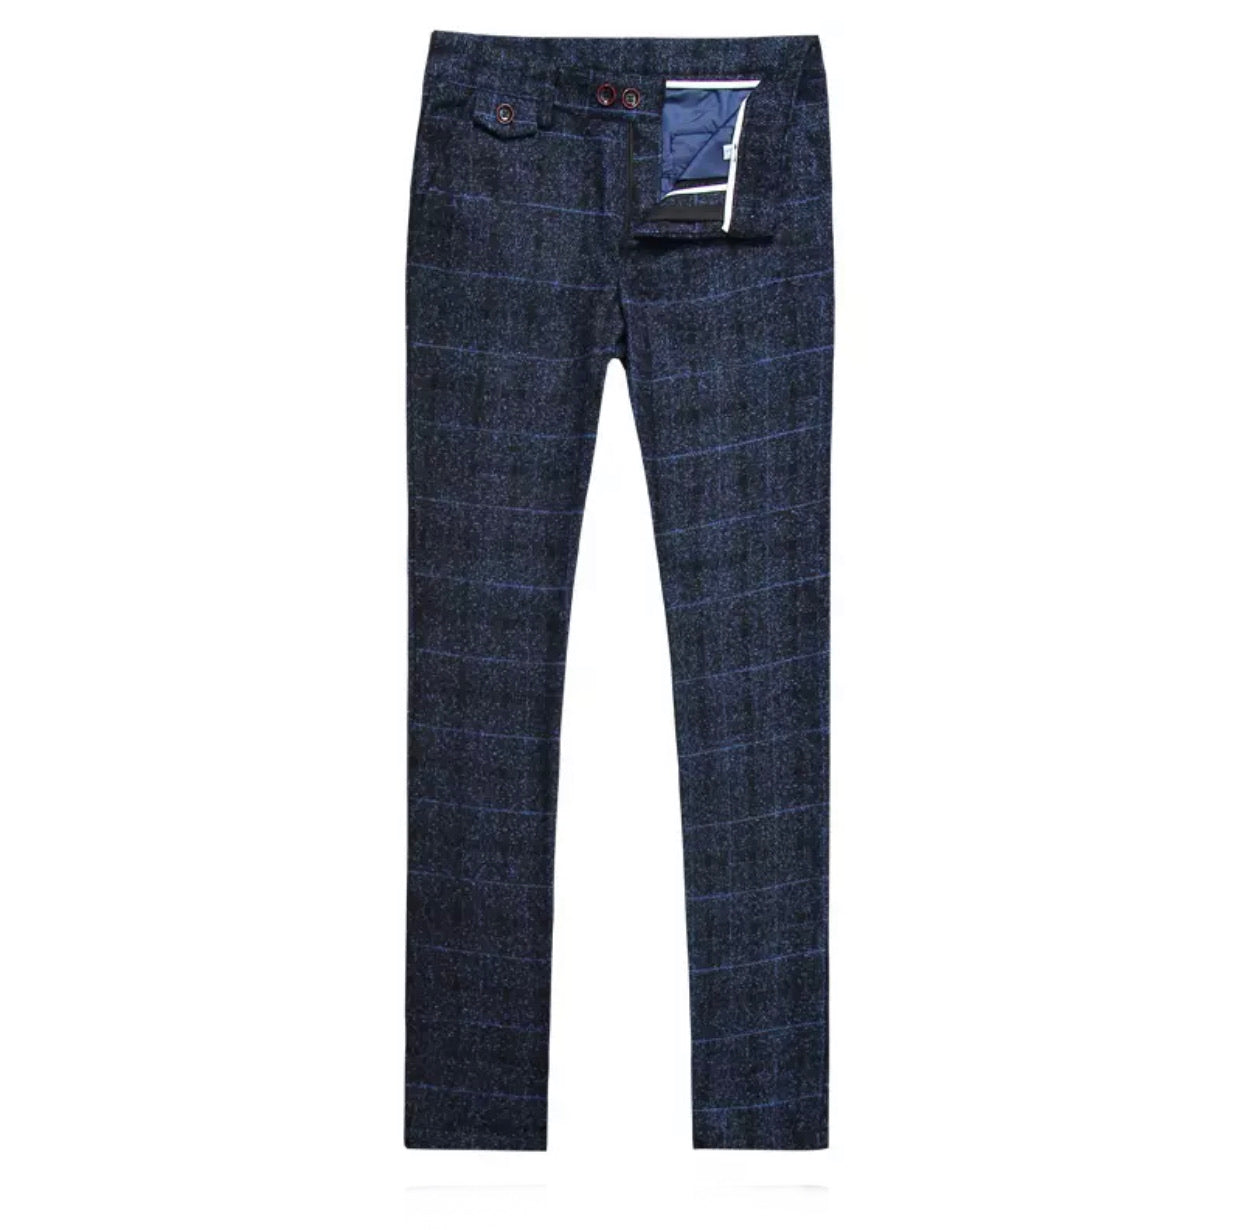 The Plaid Trouser - Up to Size 40